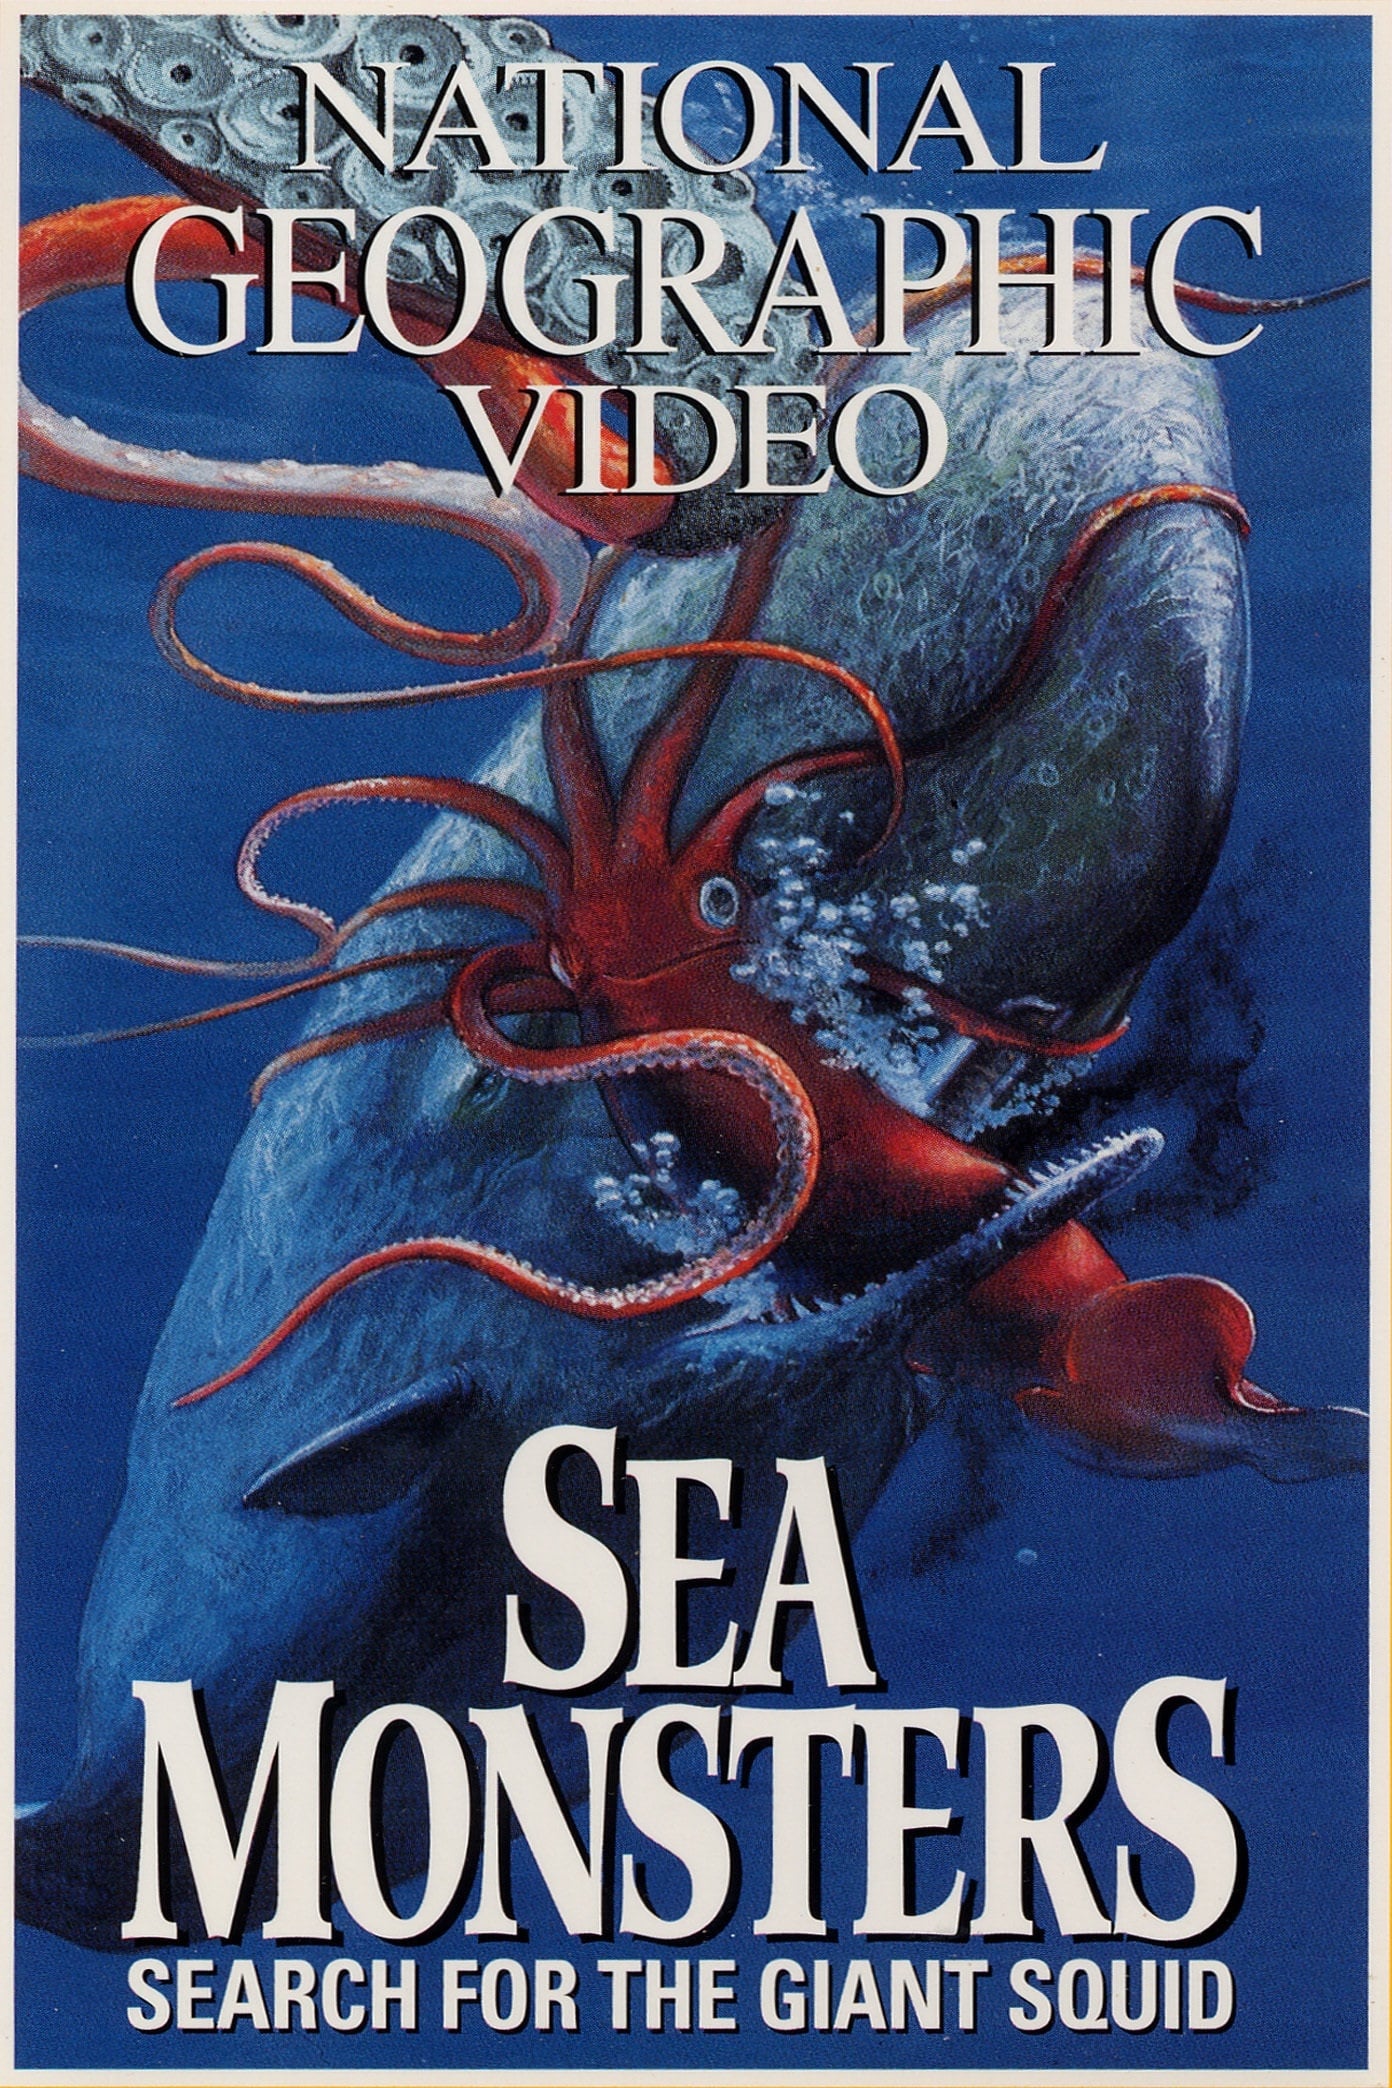 Sea Monsters: Search for the Giant Squid